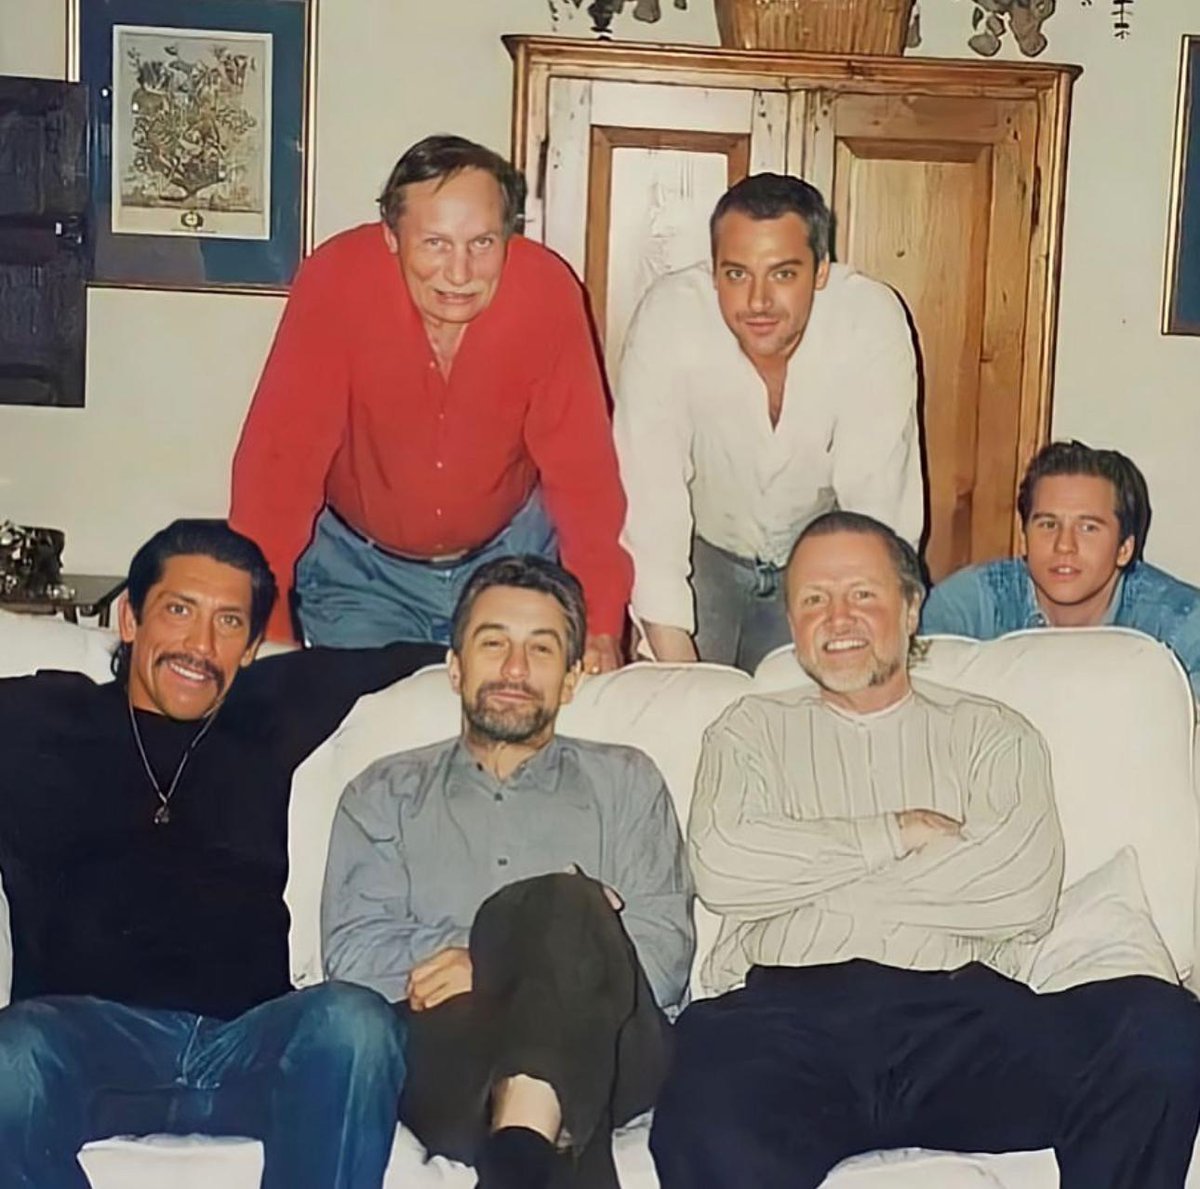 A great shot of the cast of HEAT (1995).